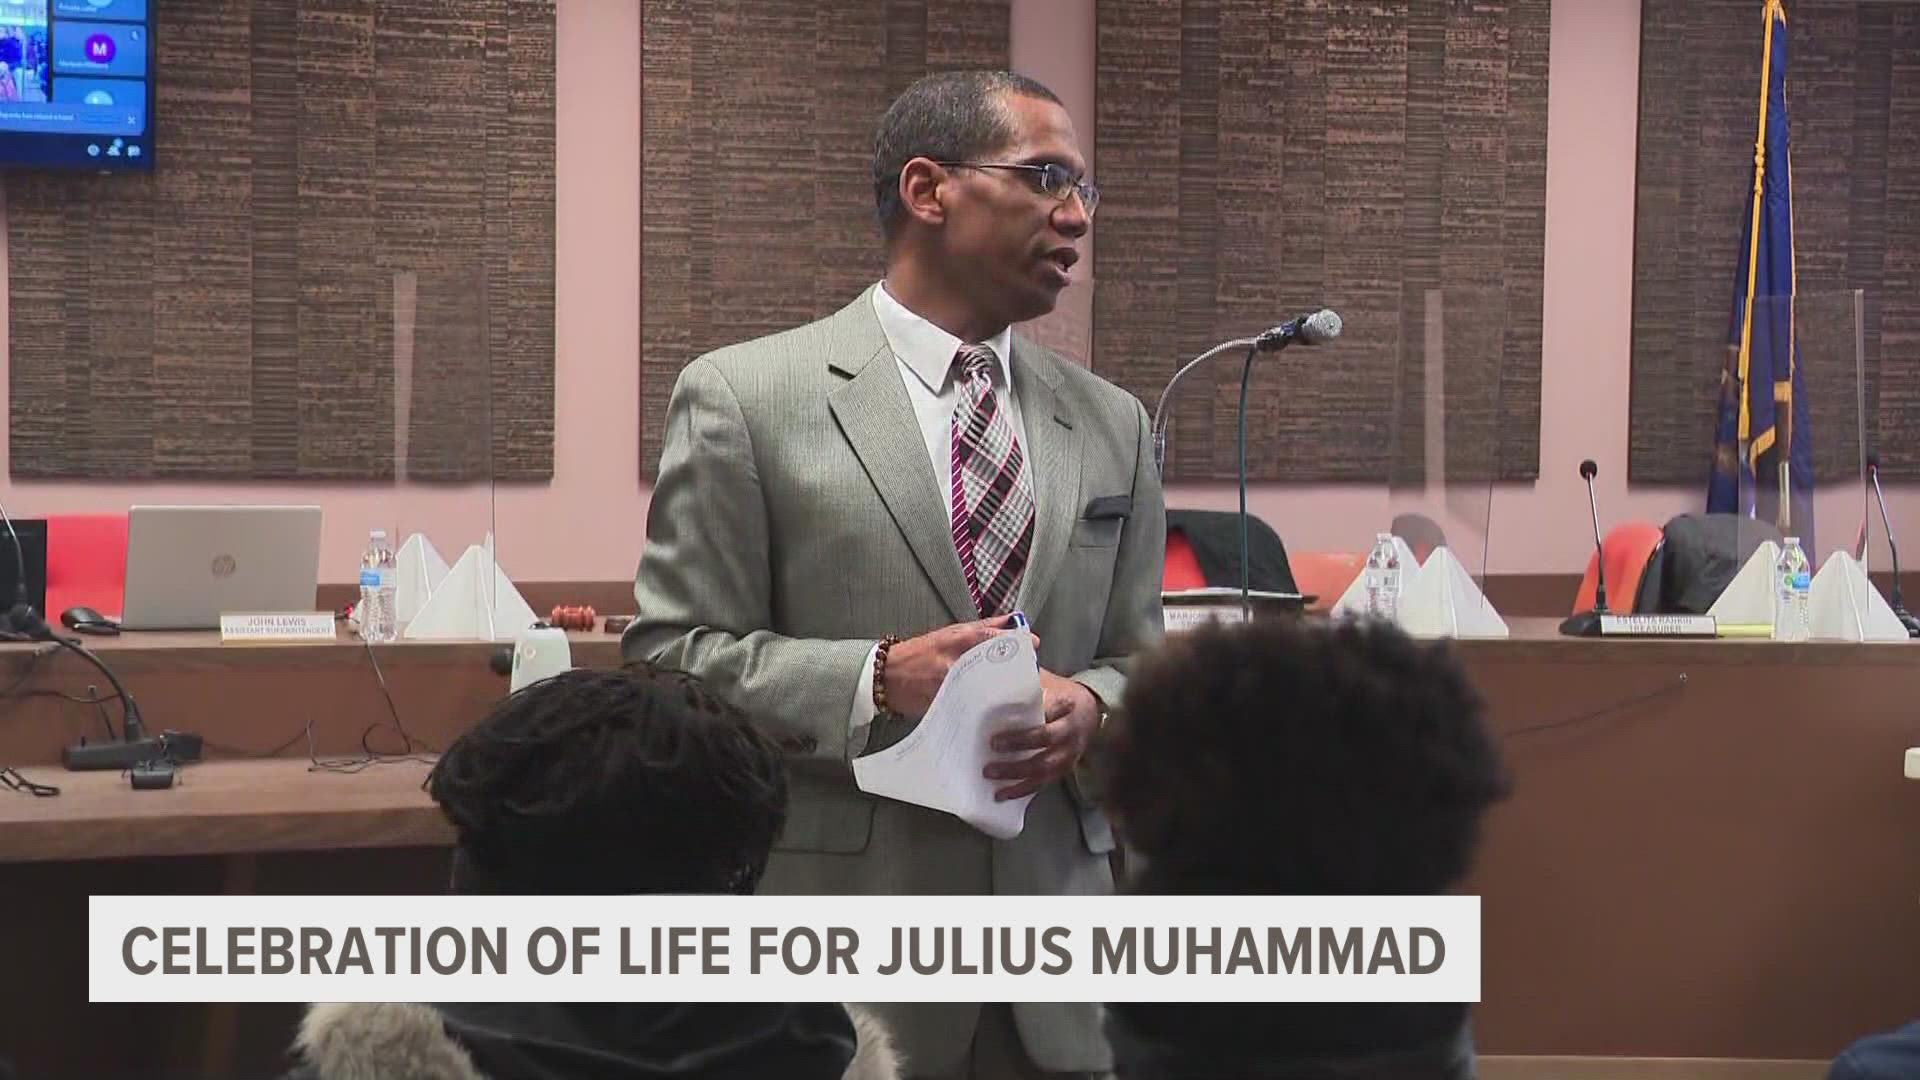 Julius Muhammad, 53, was shot and killed last week in his home. He will be laid to rest in a Muslim funeral service on Wednesday.